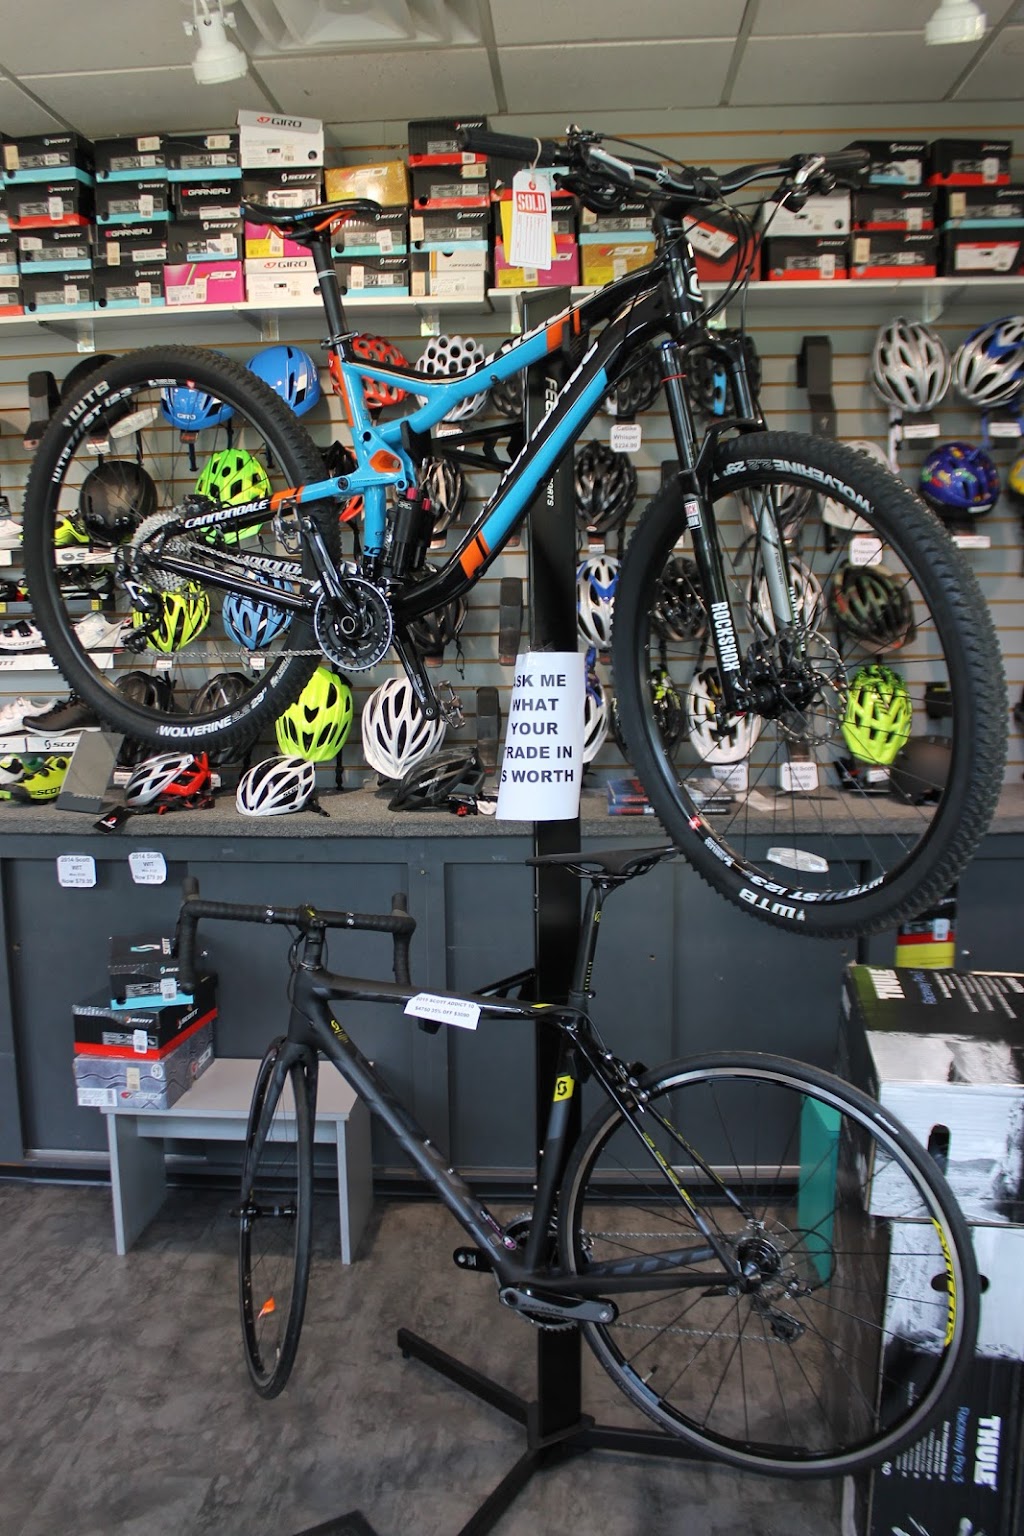 Piermont Bicycle Connection - Best Bicycle and Accessories Shop | 215 Ash St, Piermont, NY 10968 | Phone: (845) 365-0900 ext. 1